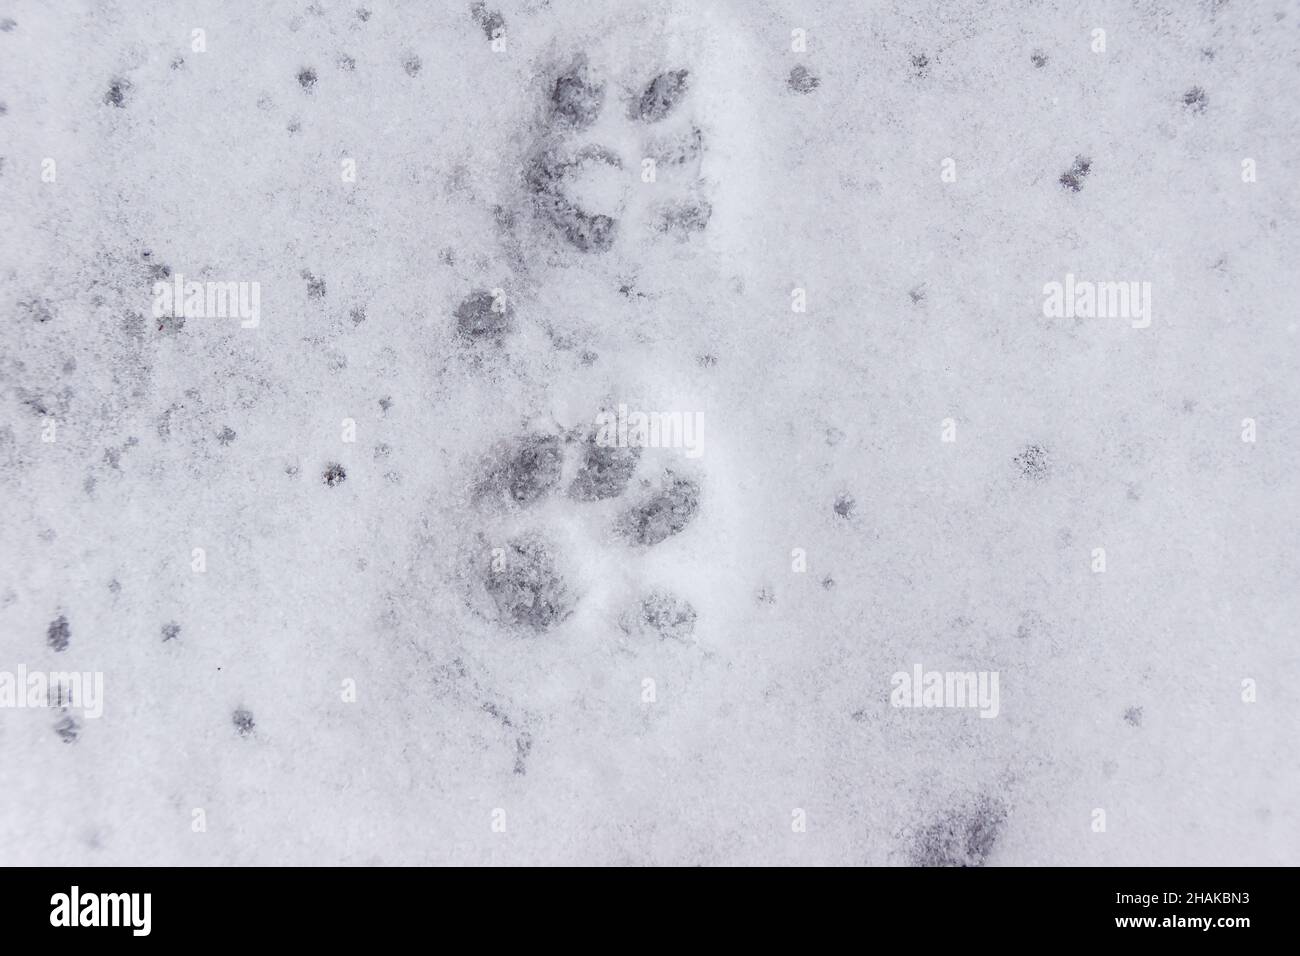 on the freshly fallen snow, cat footprints covered with several snowflakes, selective focus Stock Photo